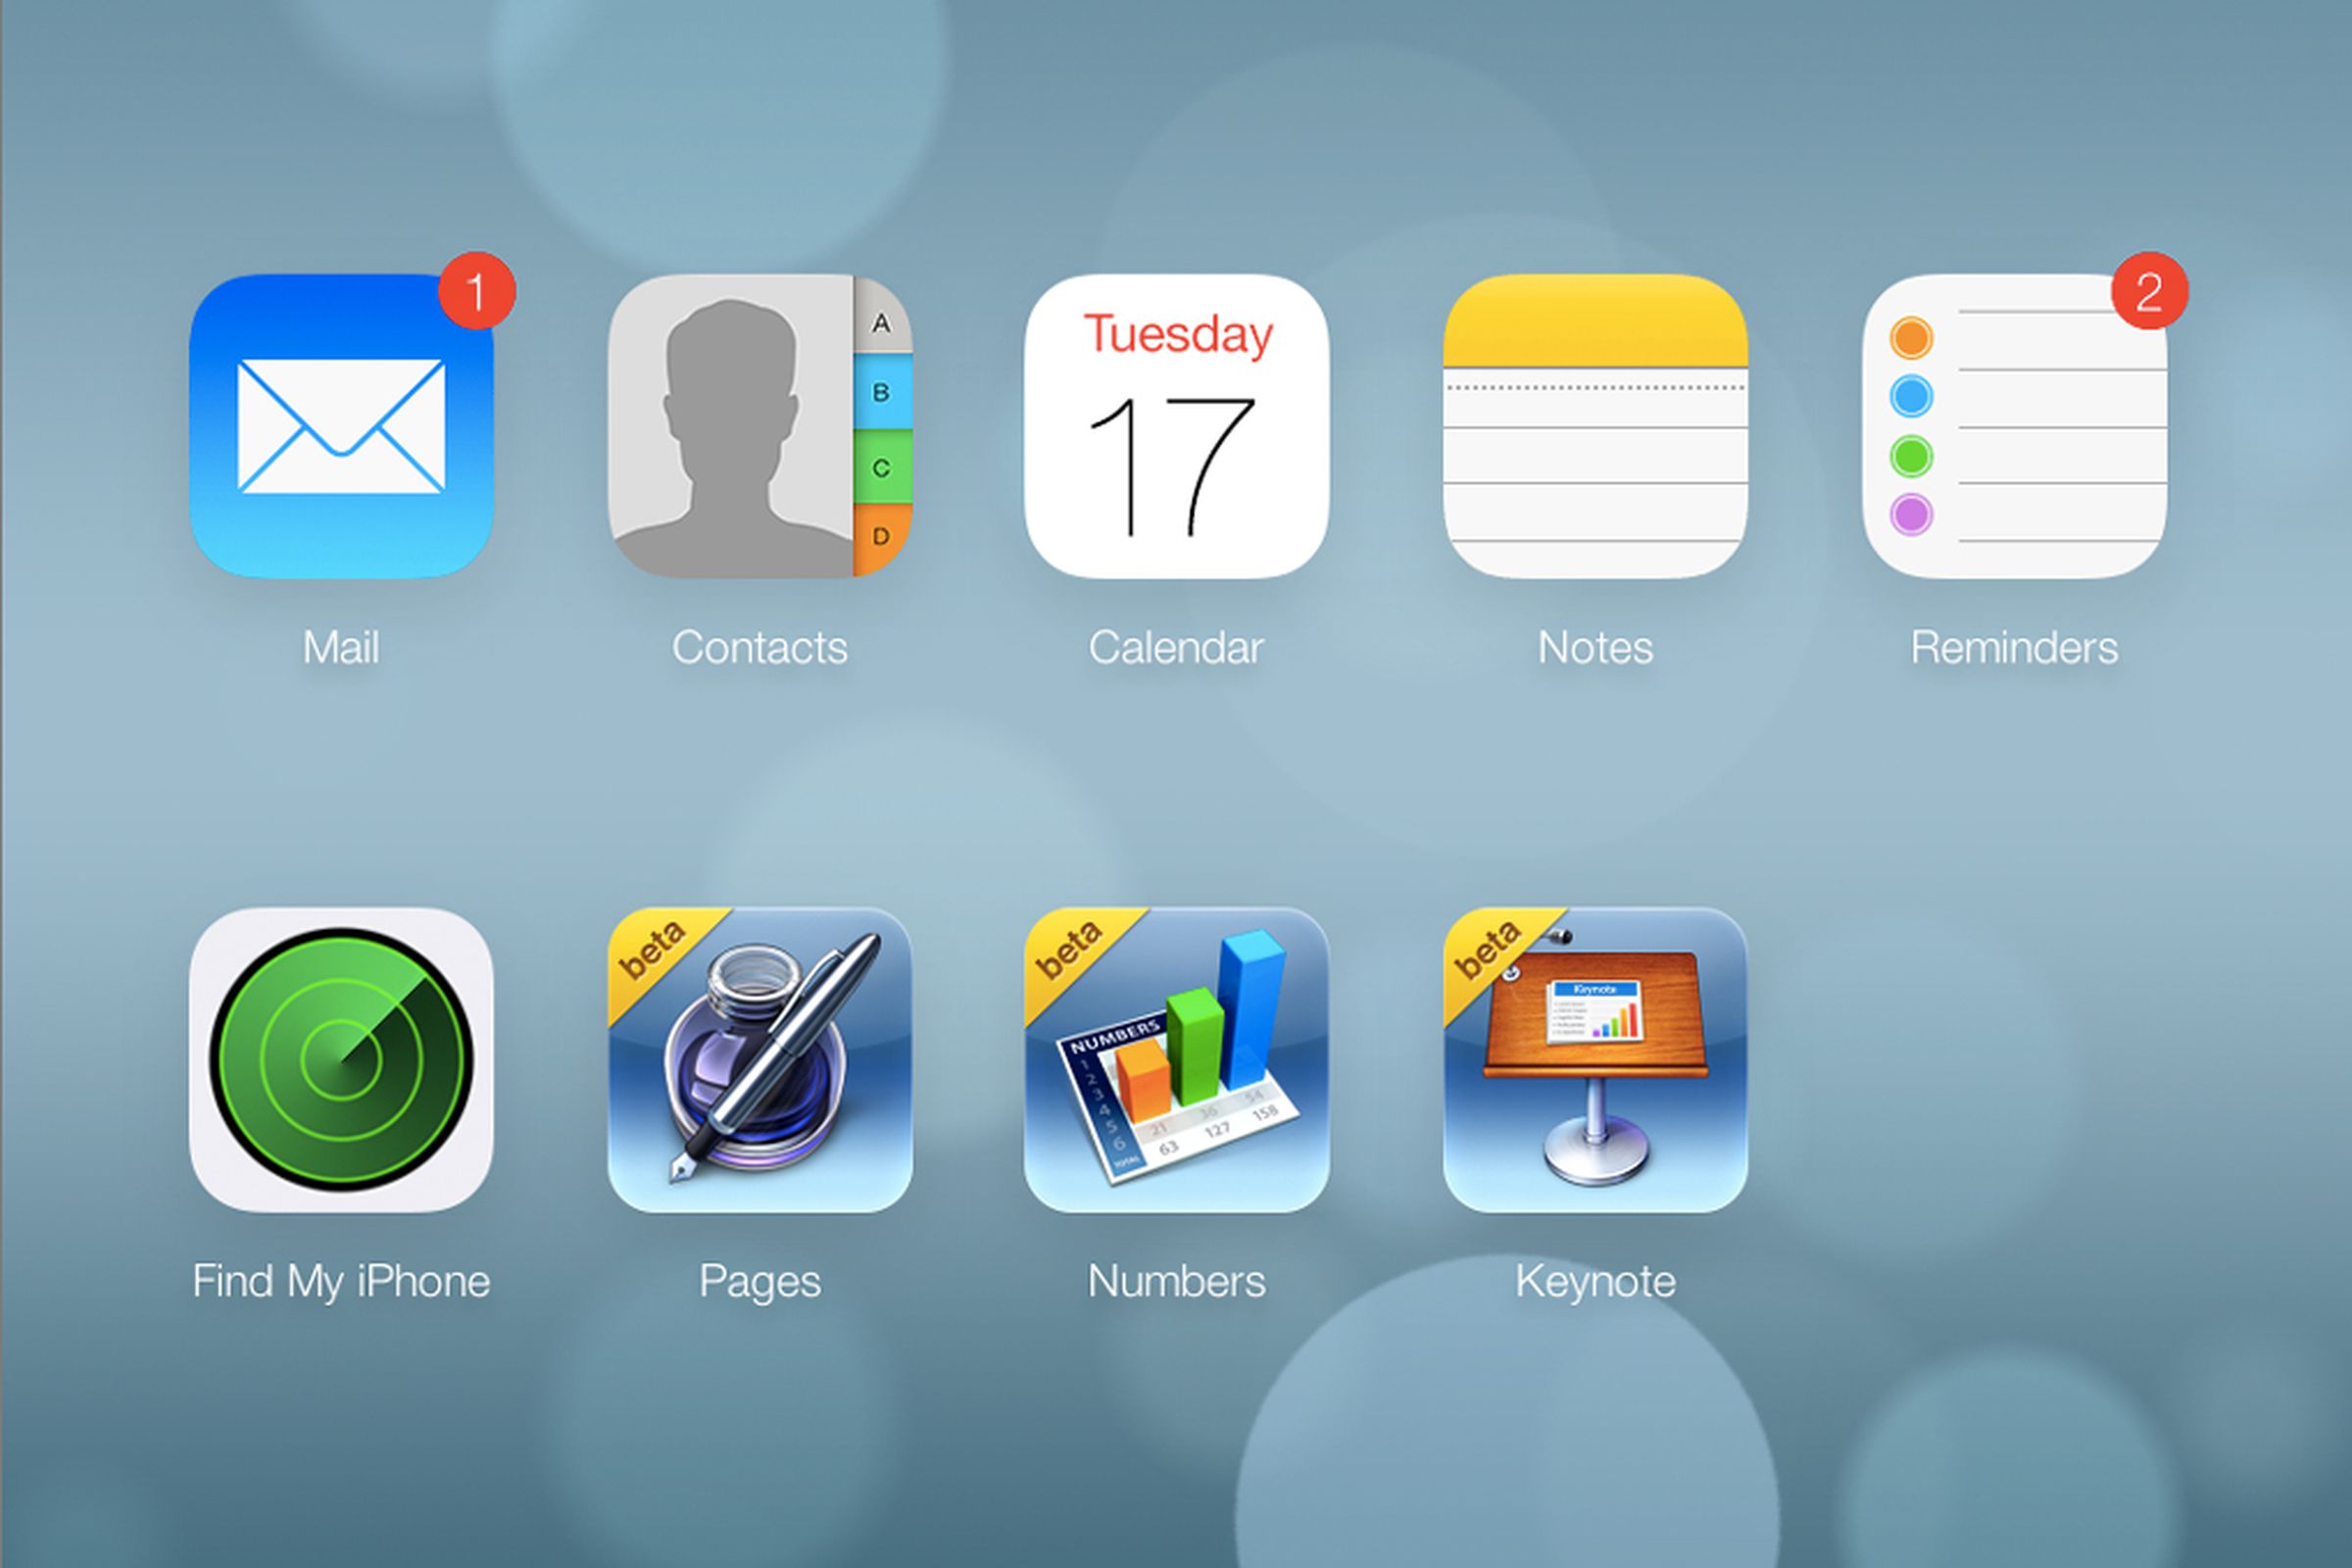 Redesigned iCloud